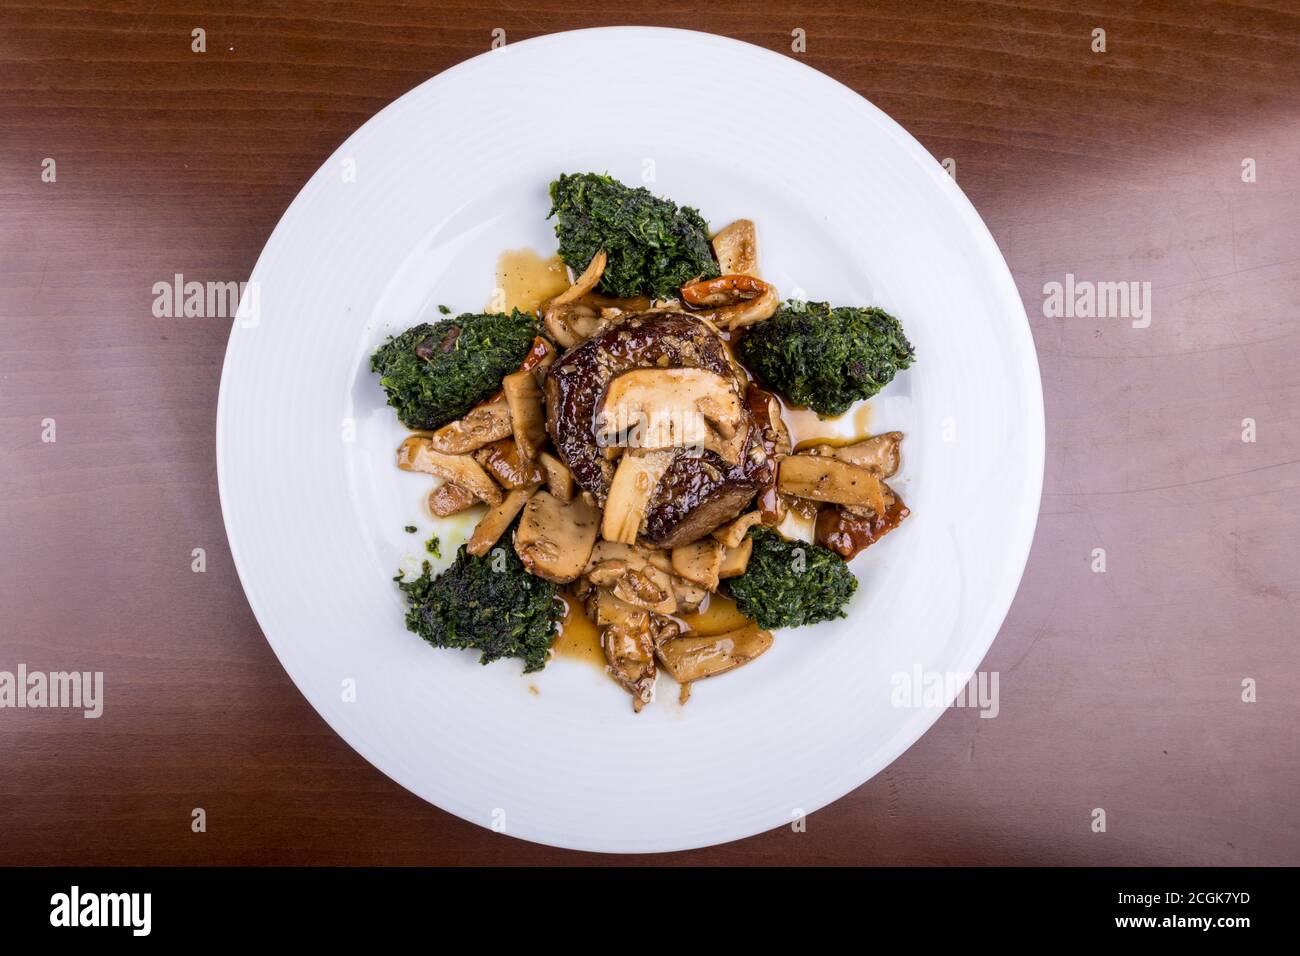 Main dish served meat with spinach and mushroom sauce Stock Photo